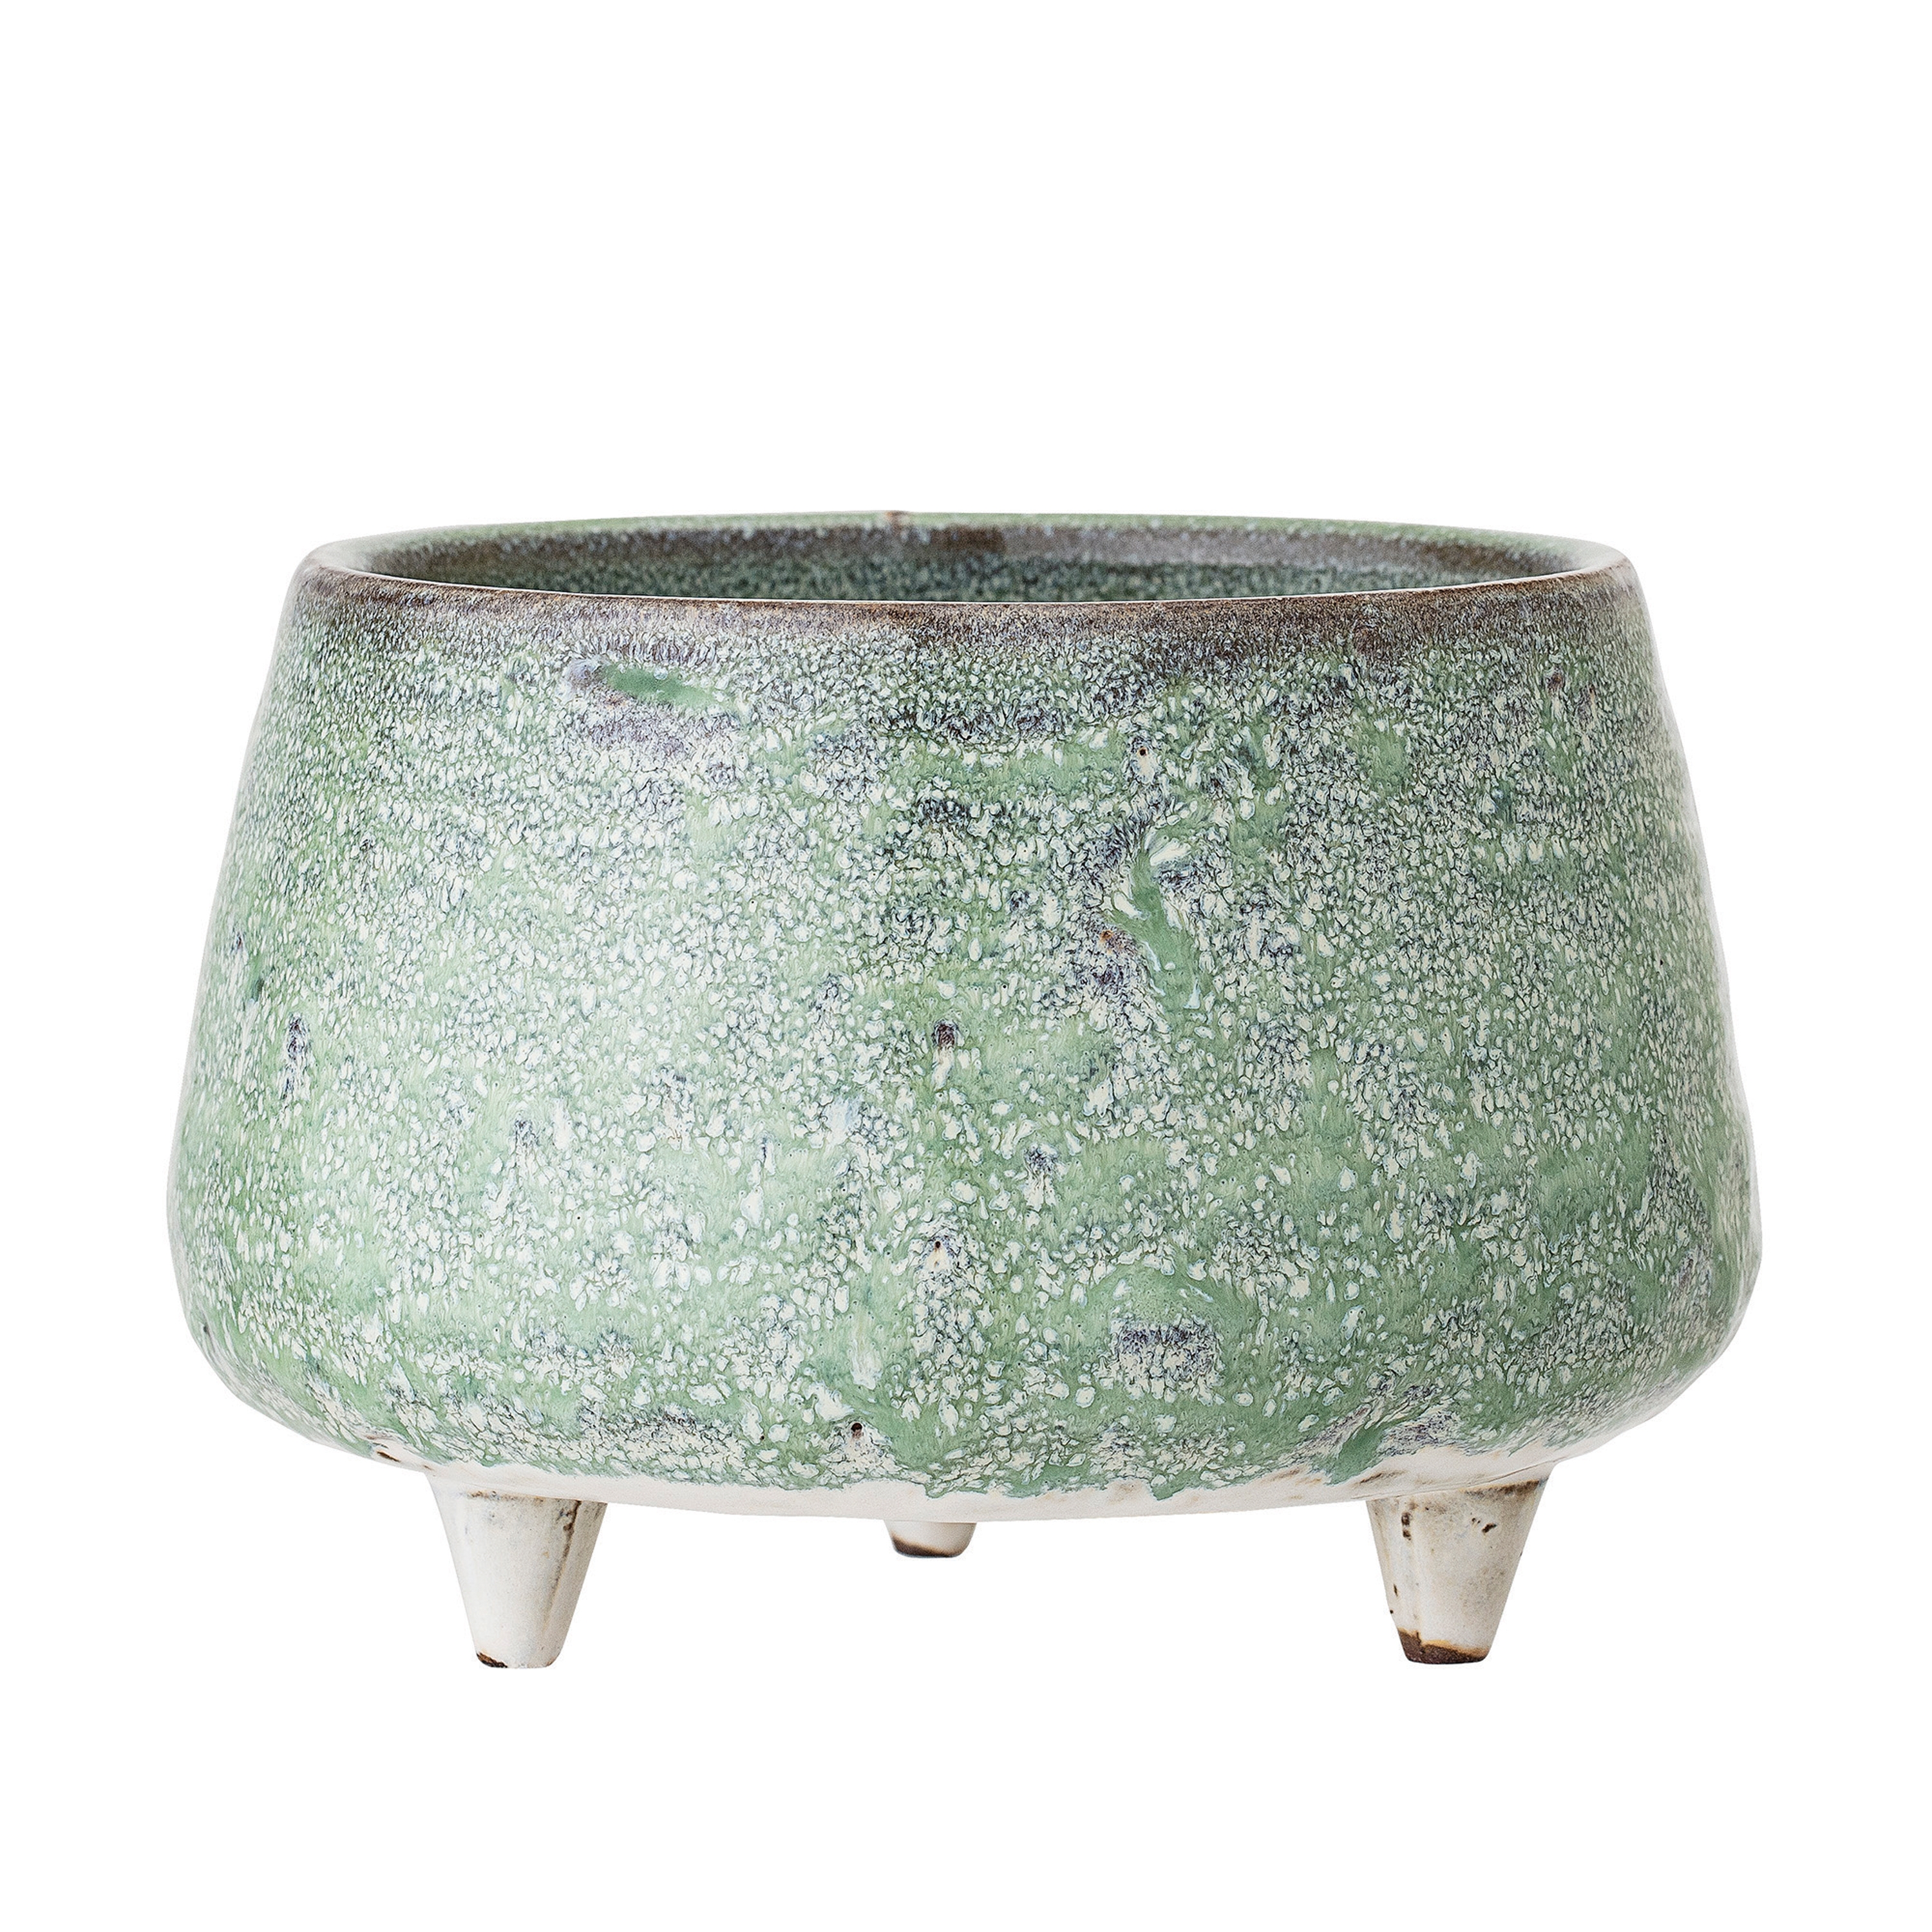 Green Stoneware Footed Planter with Reactive Glaze Finish (Each one will vary) - Image 0